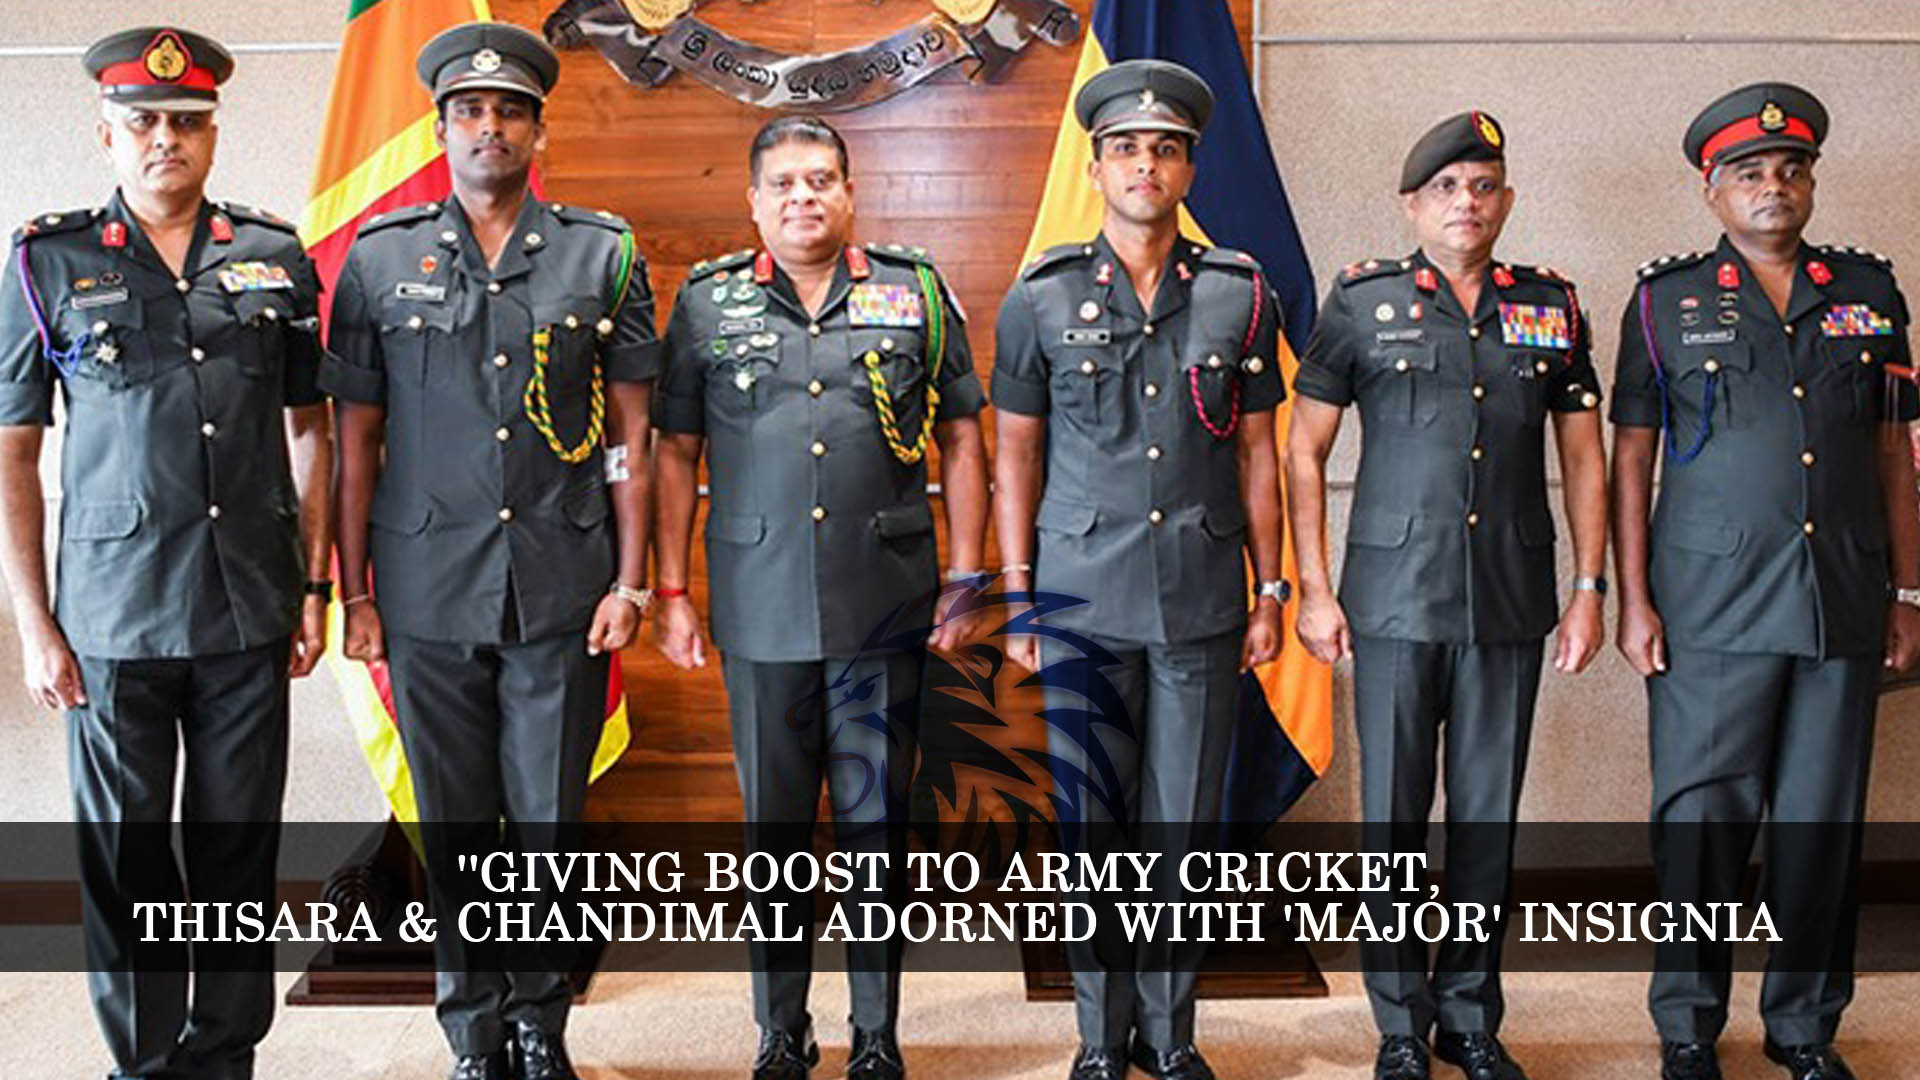 ”Giving Boost to Army Cricket, Thisara & Chandimal Adorned with ‘Major’ Insignia